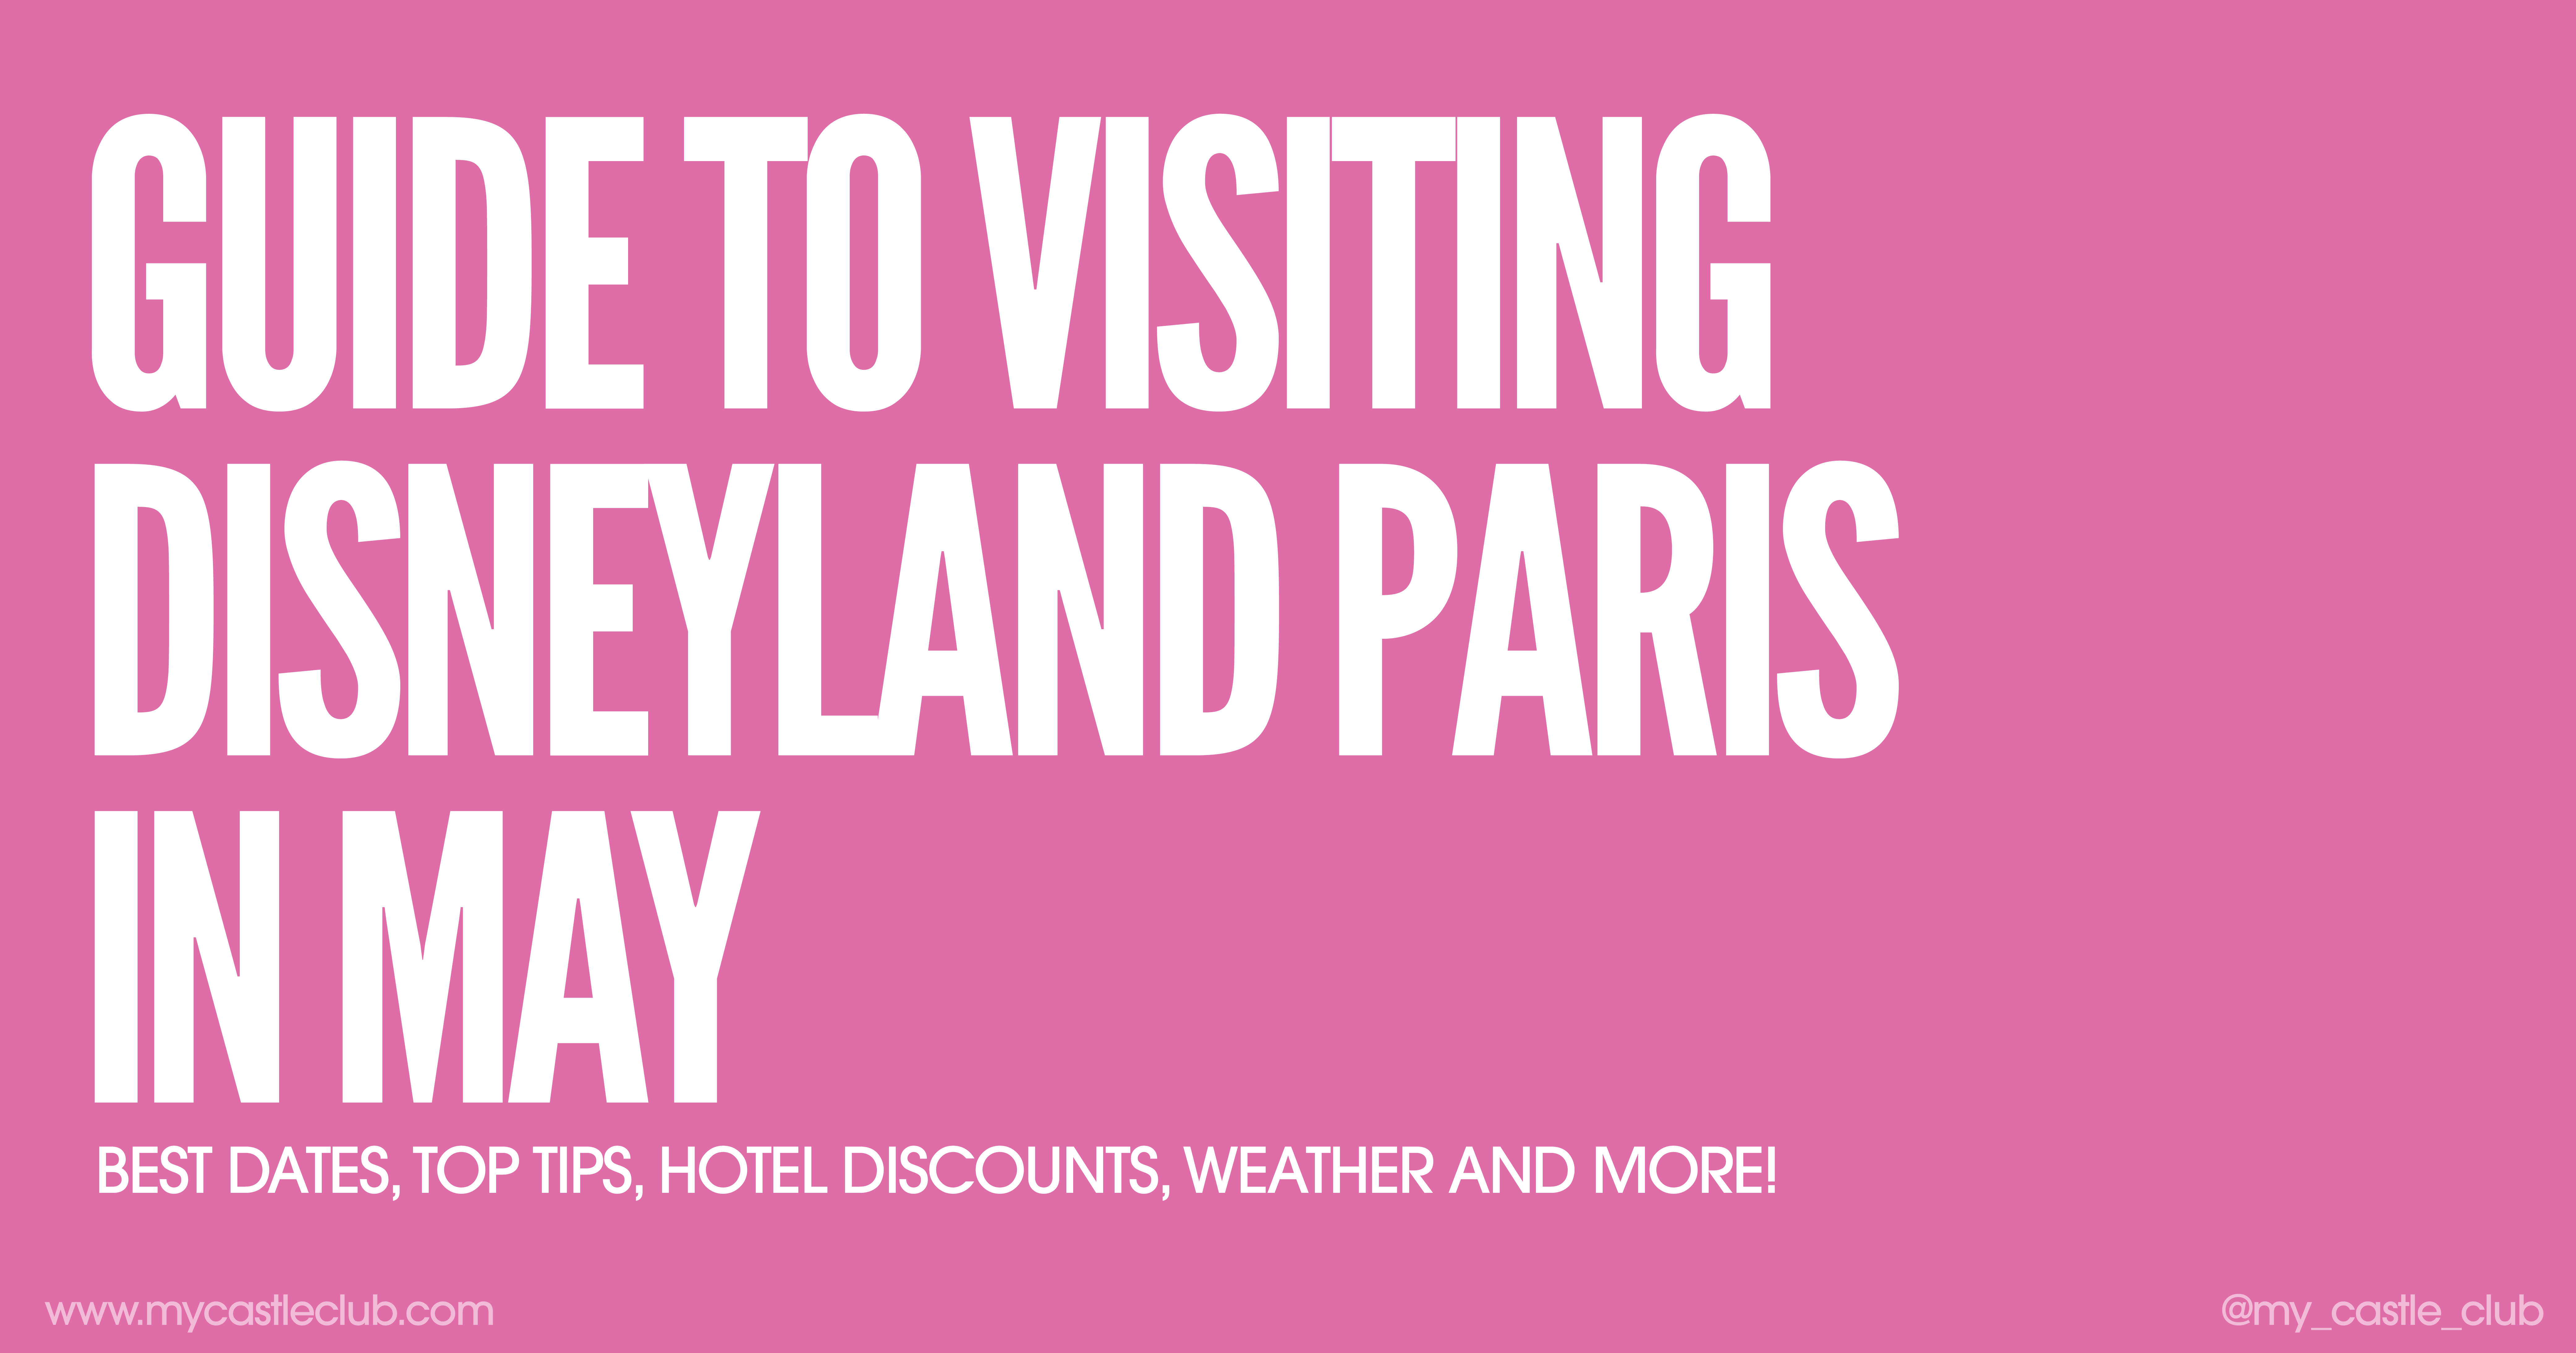 Visiting Disneyland Paris in May, Best Dates, Top Tips, Hotel Discounts, Weather and more!